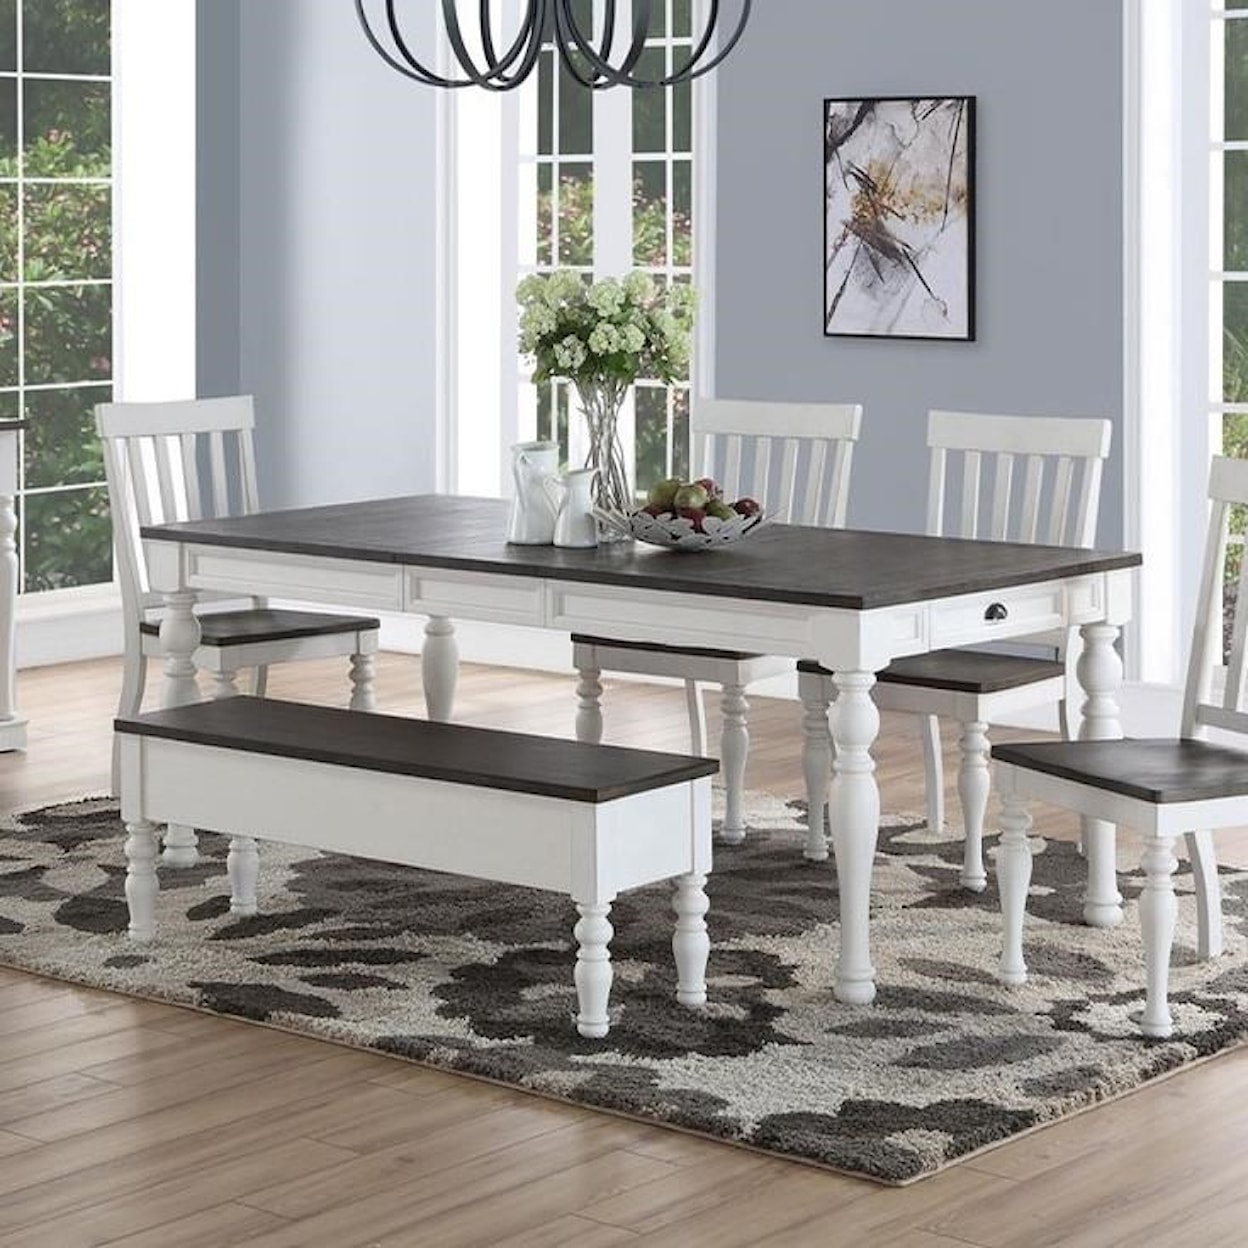 Prime Joanna Dining Room Table